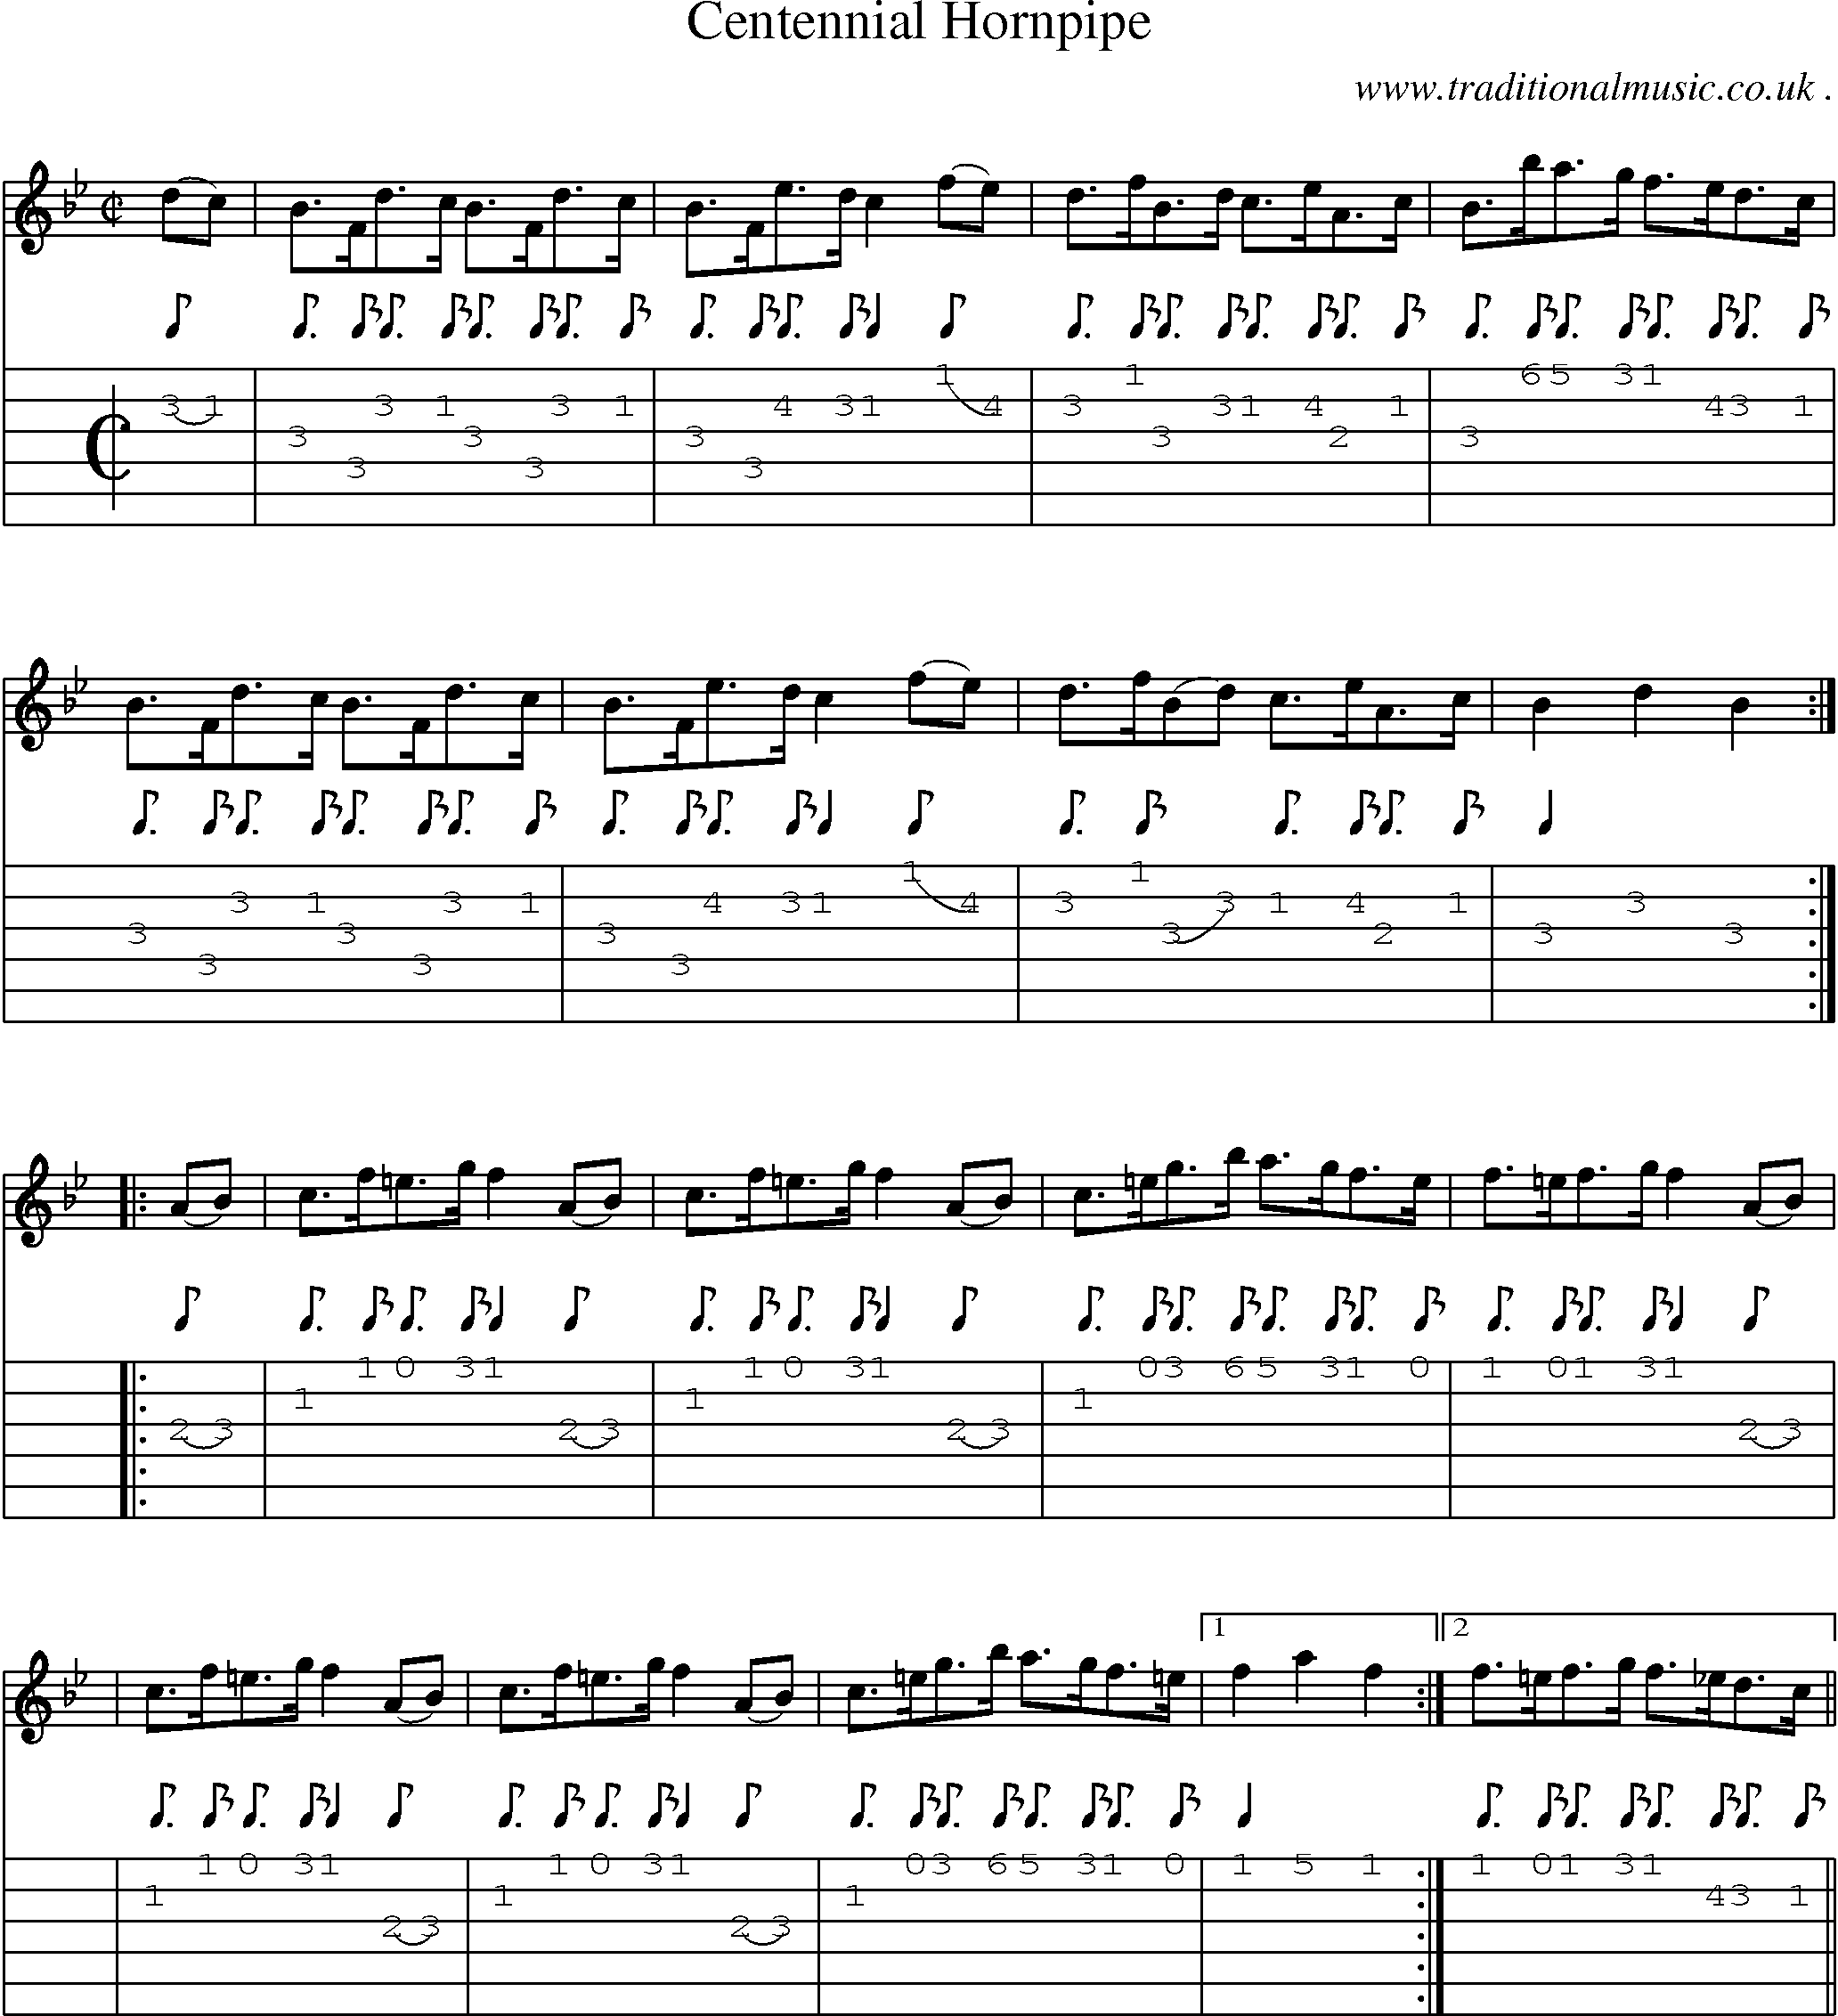 Sheet-Music and Guitar Tabs for Centennial Hornpipe